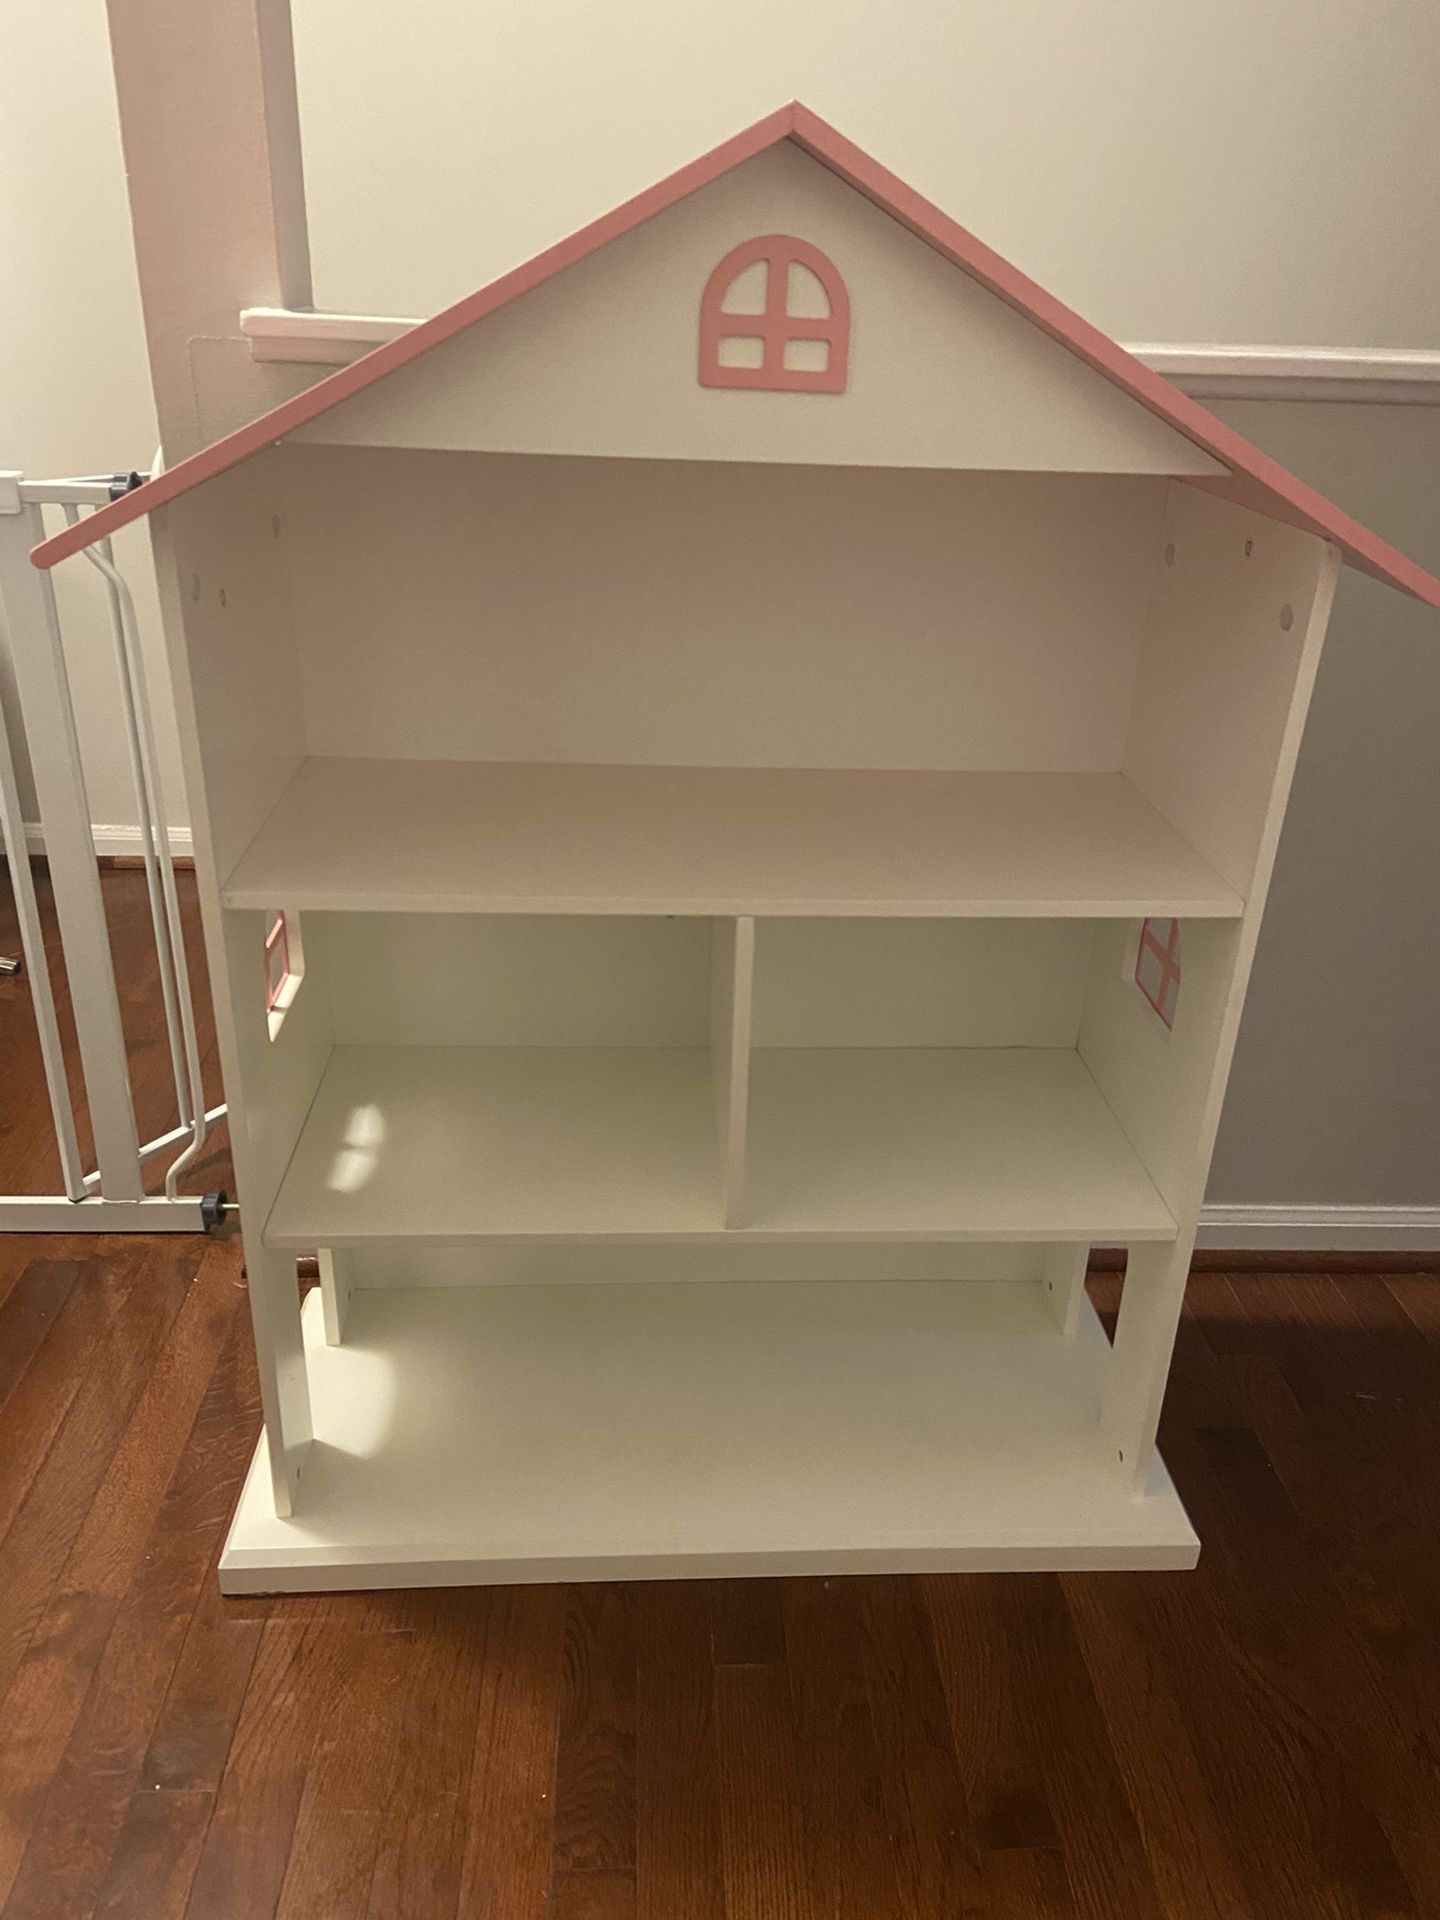 House bookcase